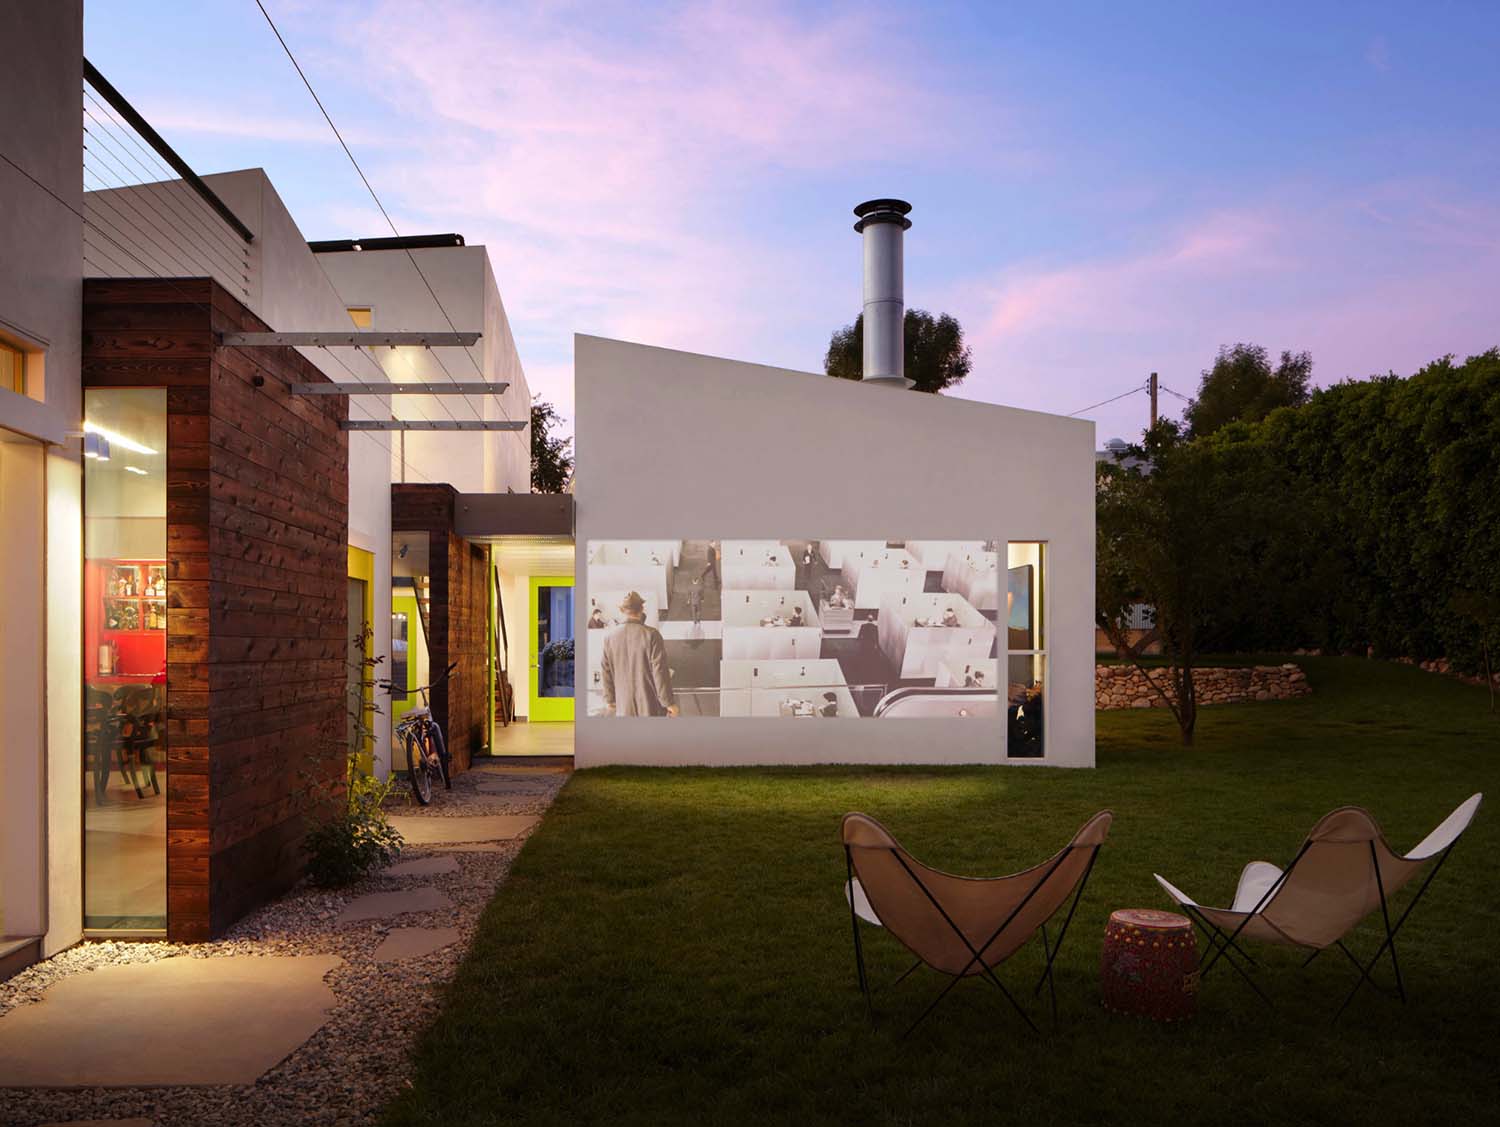 Easy DIY Outdoor Cinema Will Make Your Yard The Ultimate Place For